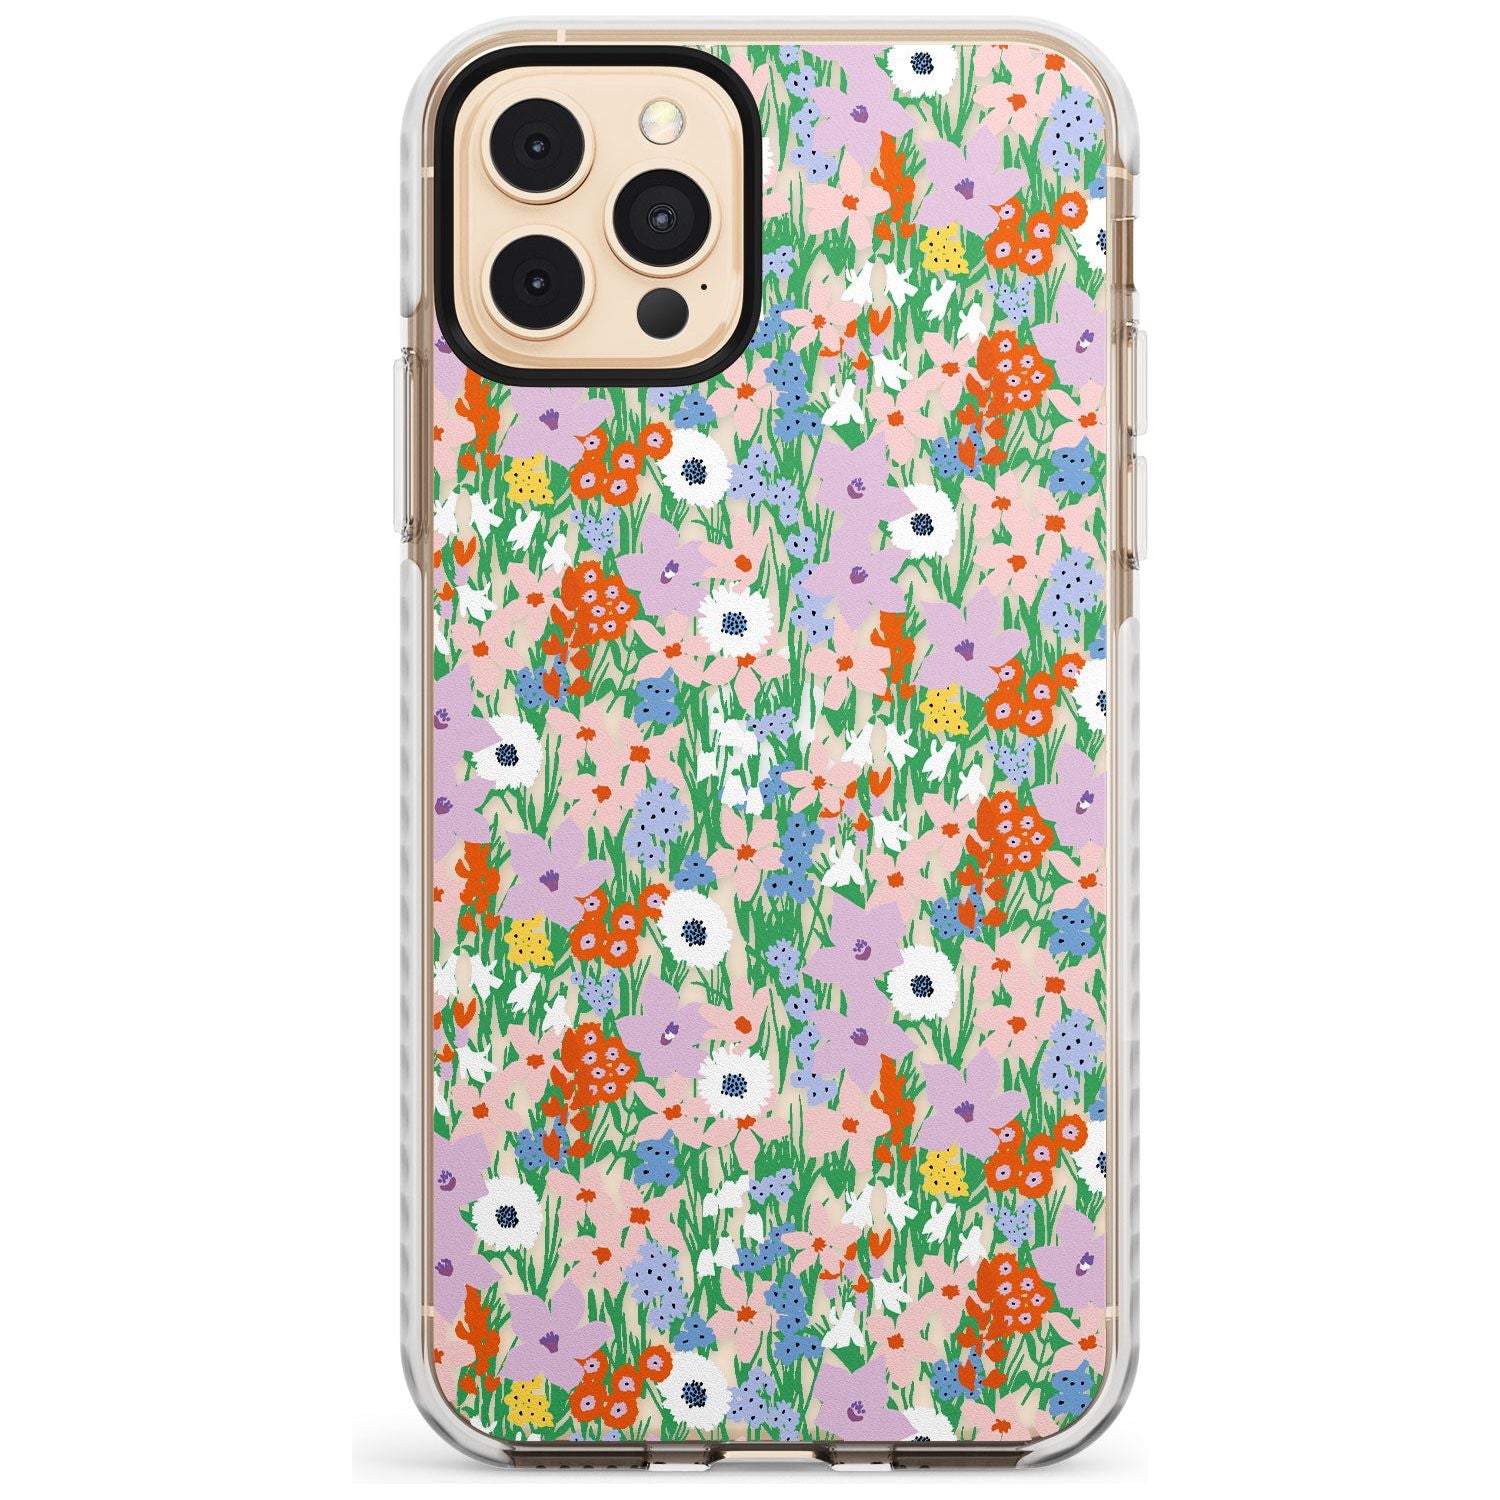 Jazzy Floral Mix: Transparent Slim TPU Phone Case for iPhone 11 Pro Max